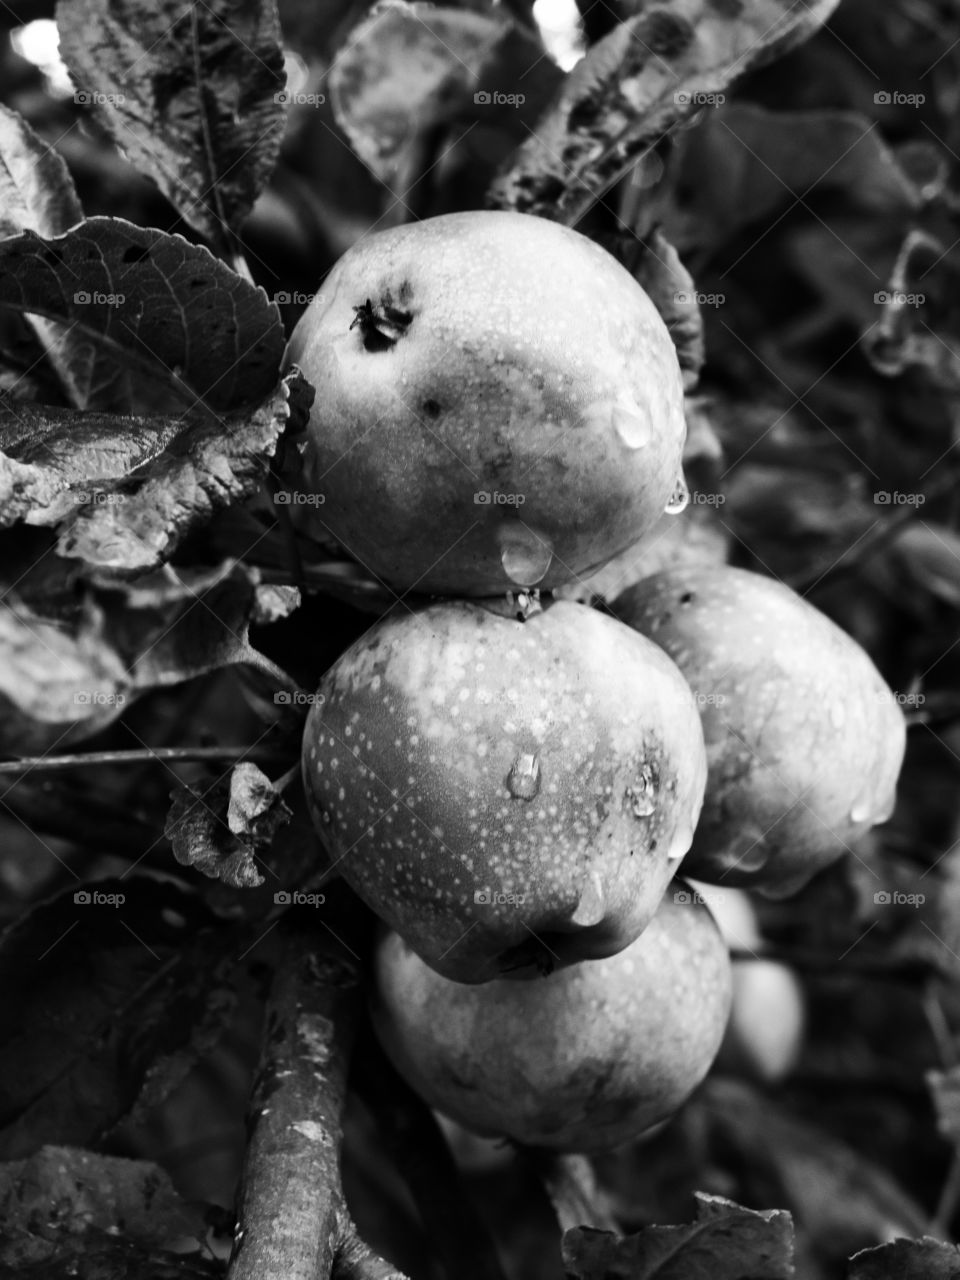 Crab apples in black and white